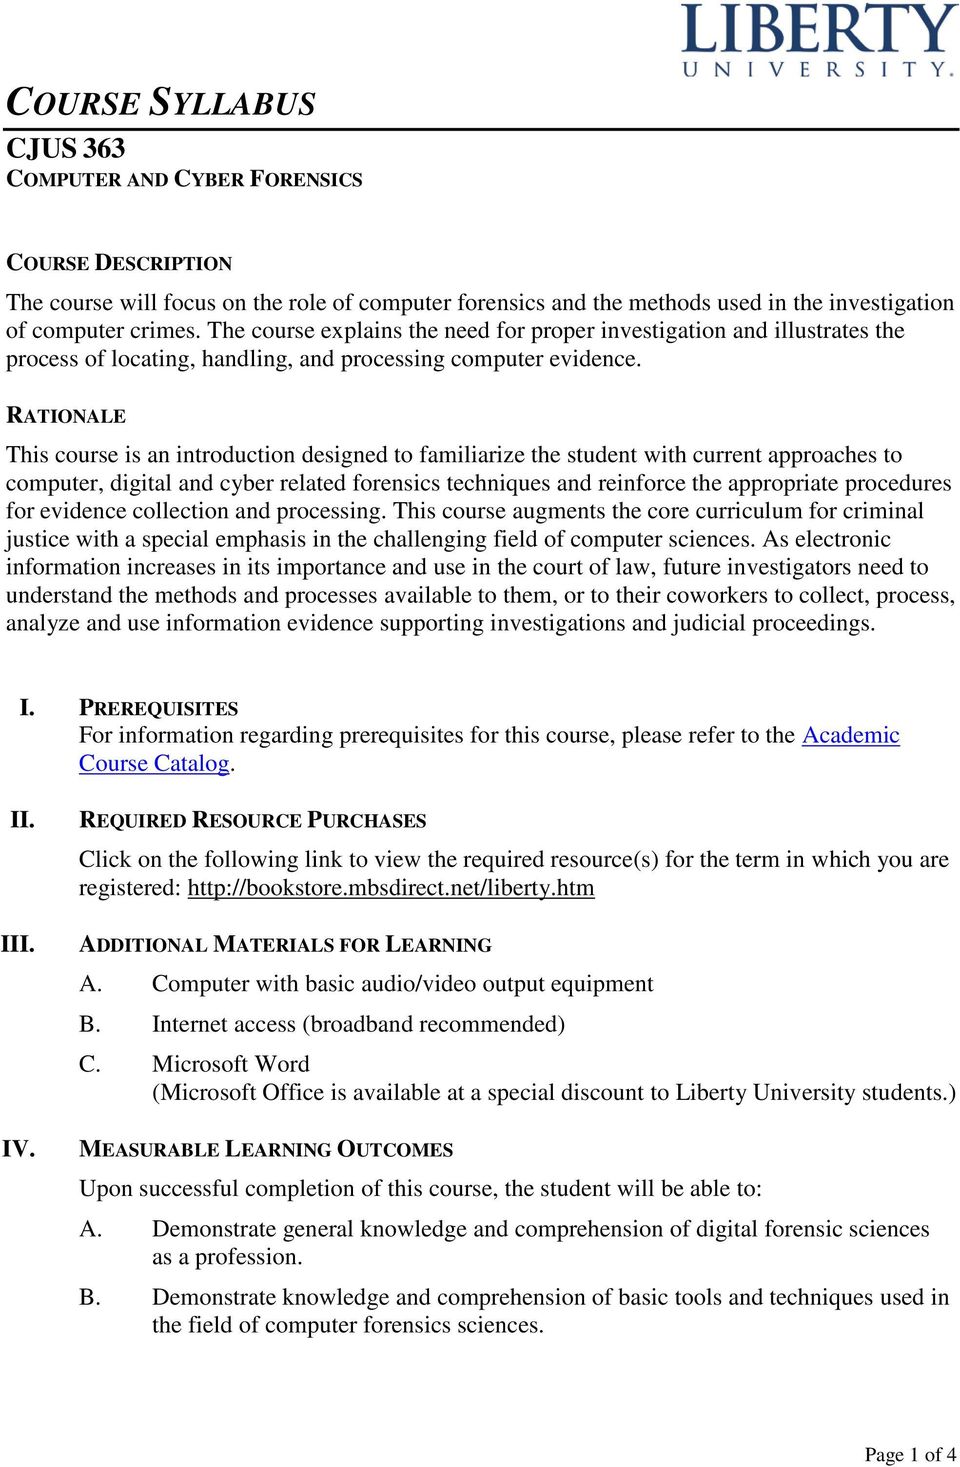 RATIONALE This course is an introduction designed to familiarize the student with current approaches to computer, digital and cyber related forensics techniques and reinforce the appropriate